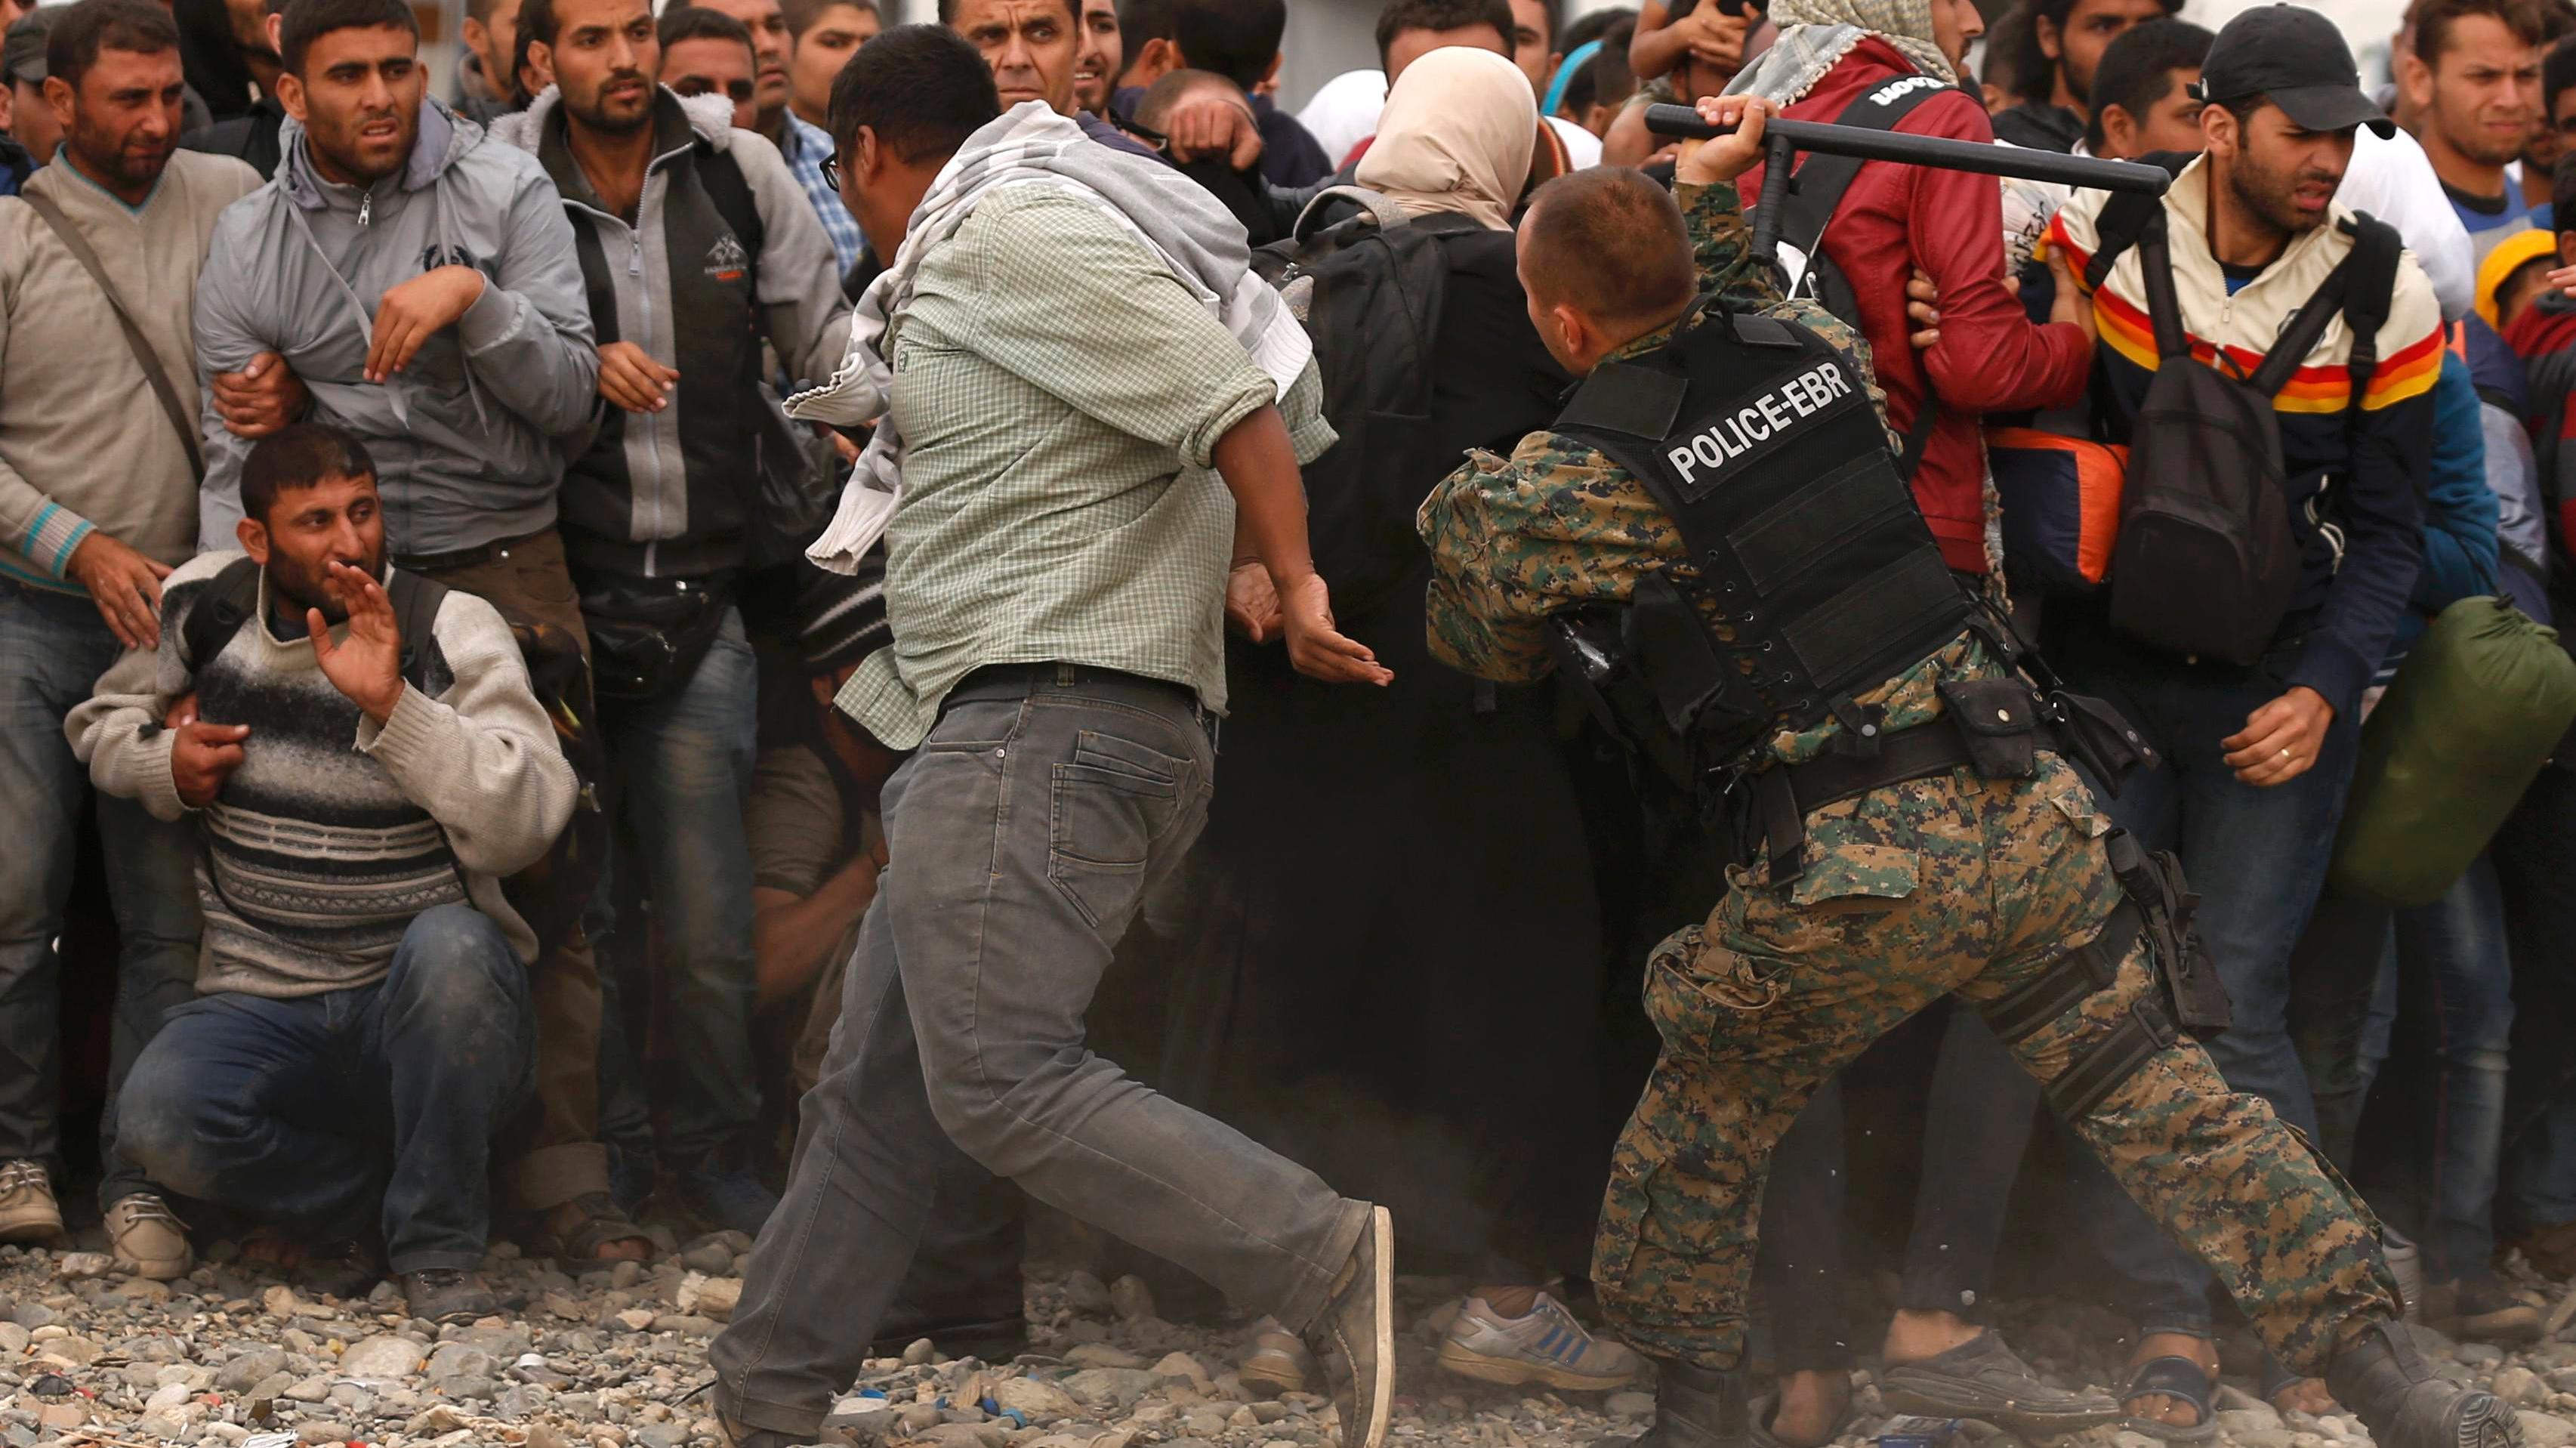 A Macedonian police officer hits a migrant in a camp near Gevgelija. While Venezuela has long welcomed refugees, Europe has dragged its feet on resolving its own refugee crisis.